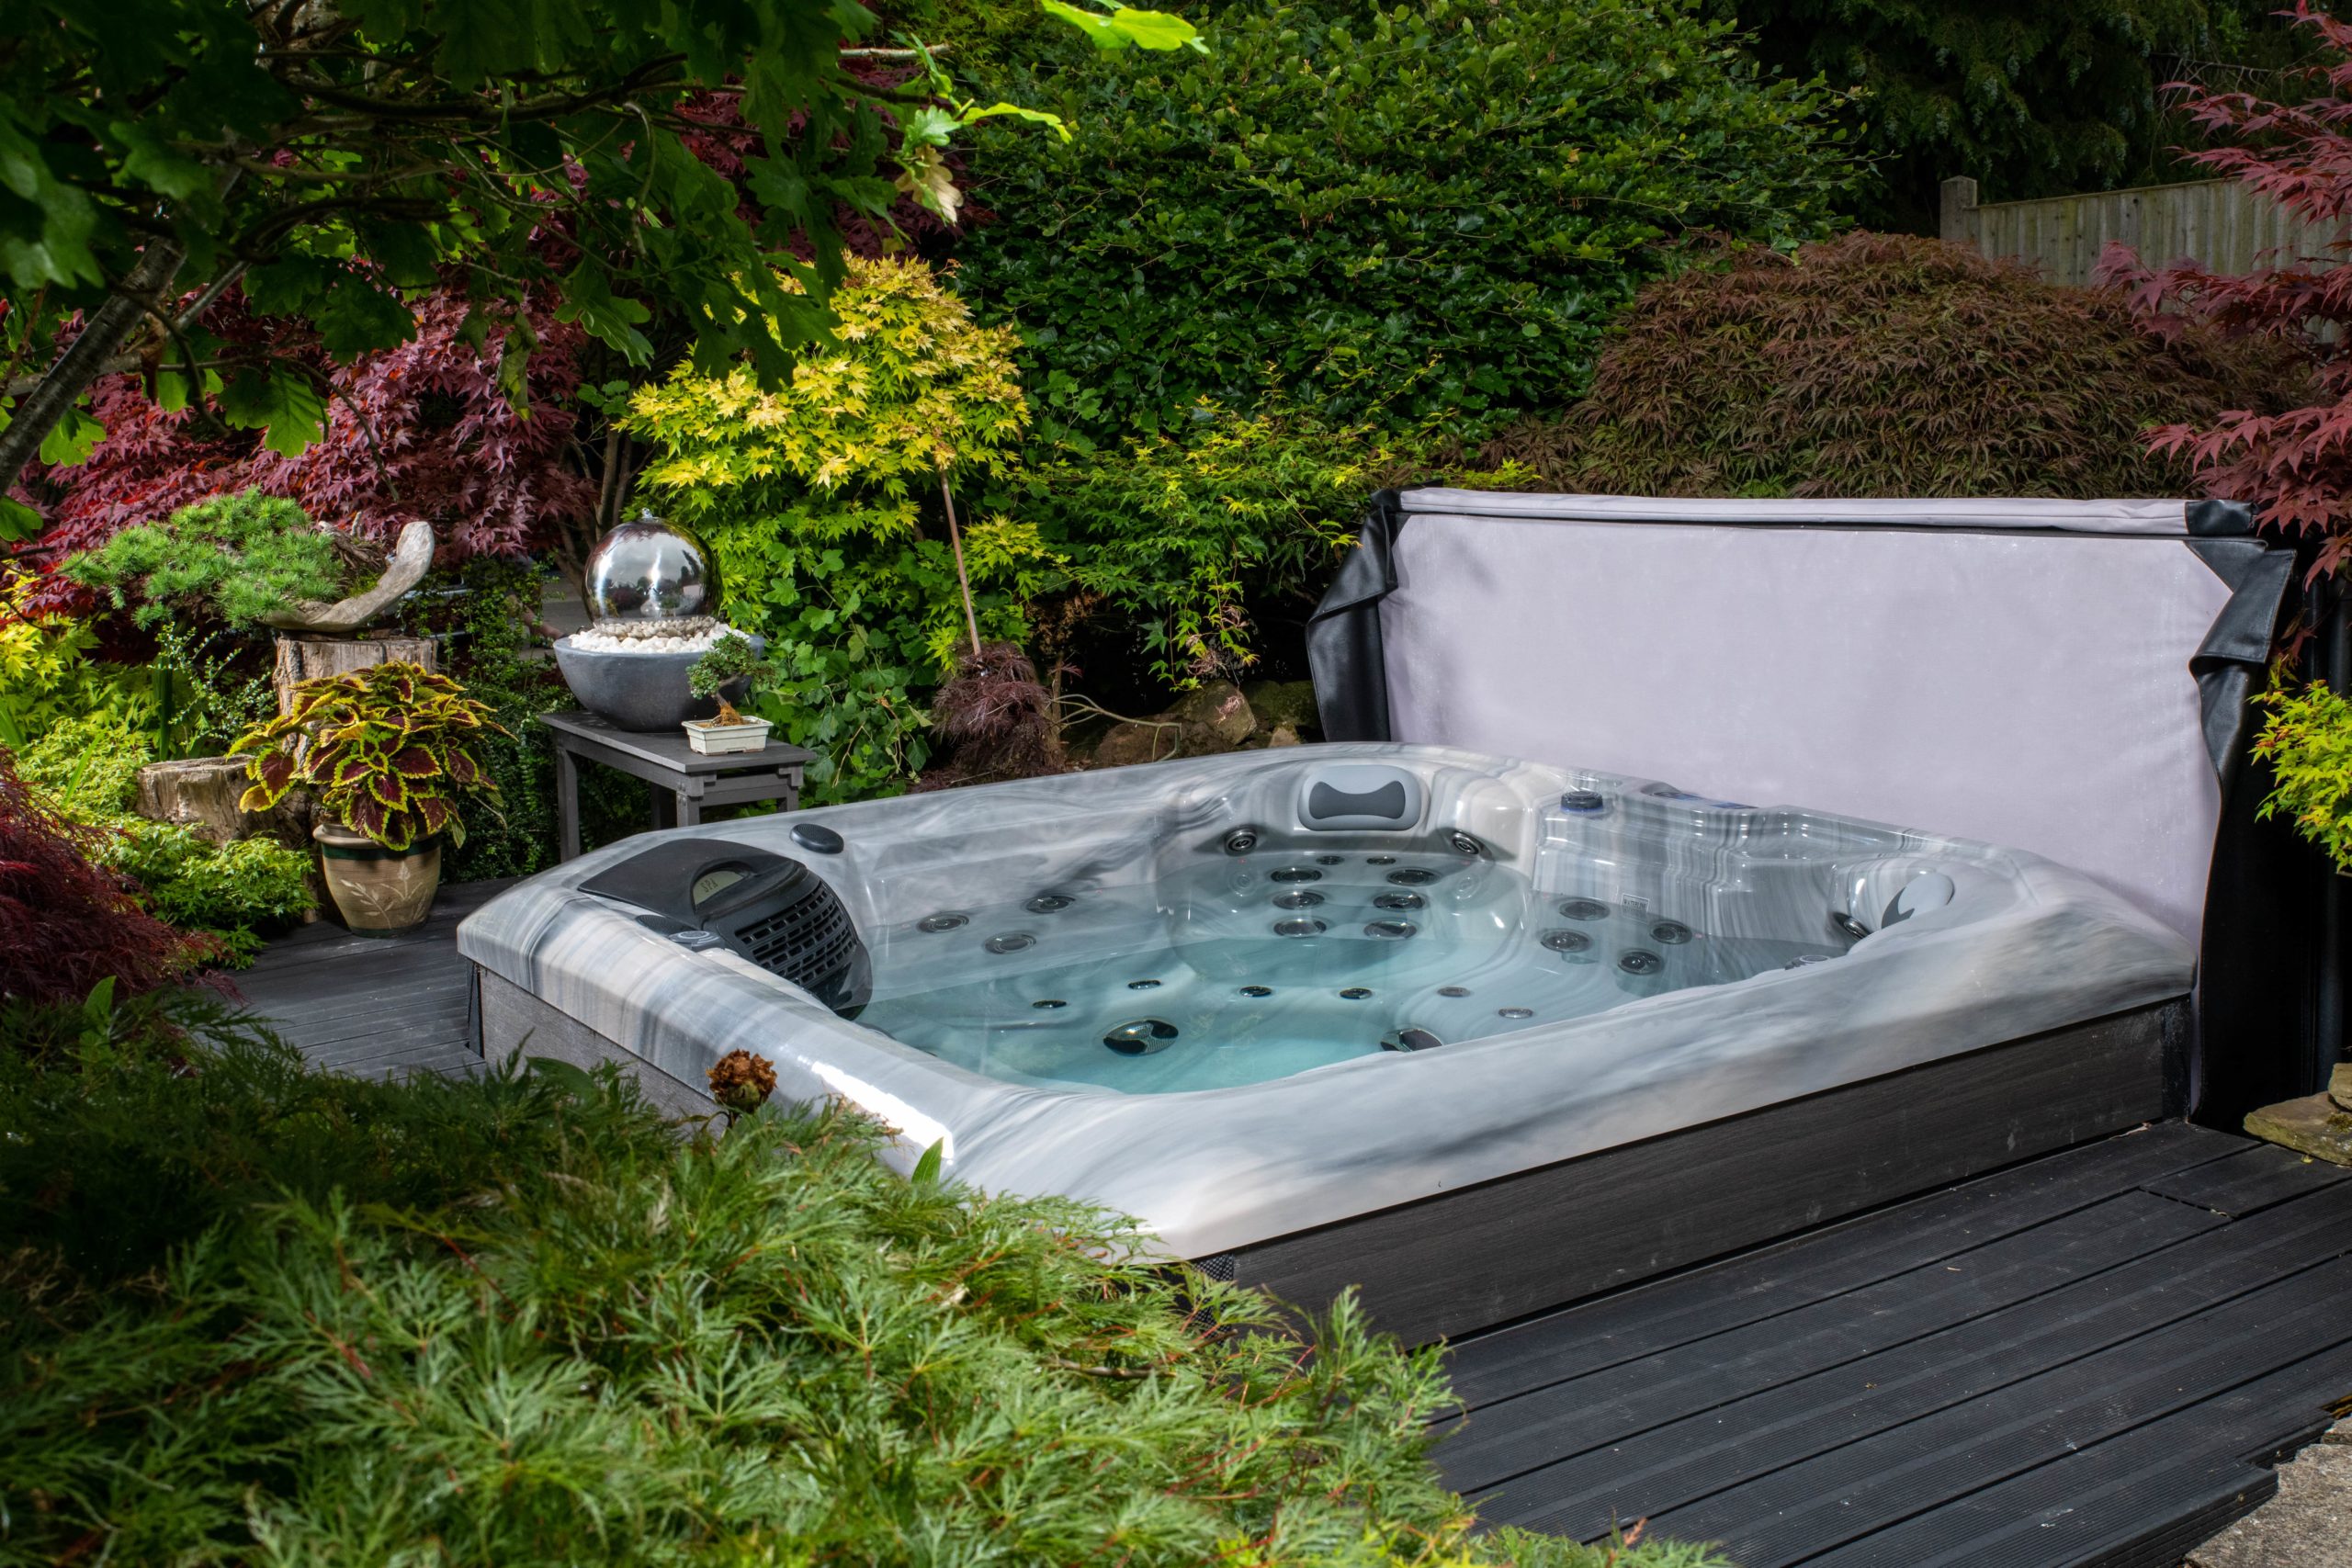 6 Person Hot Tubs for Sale